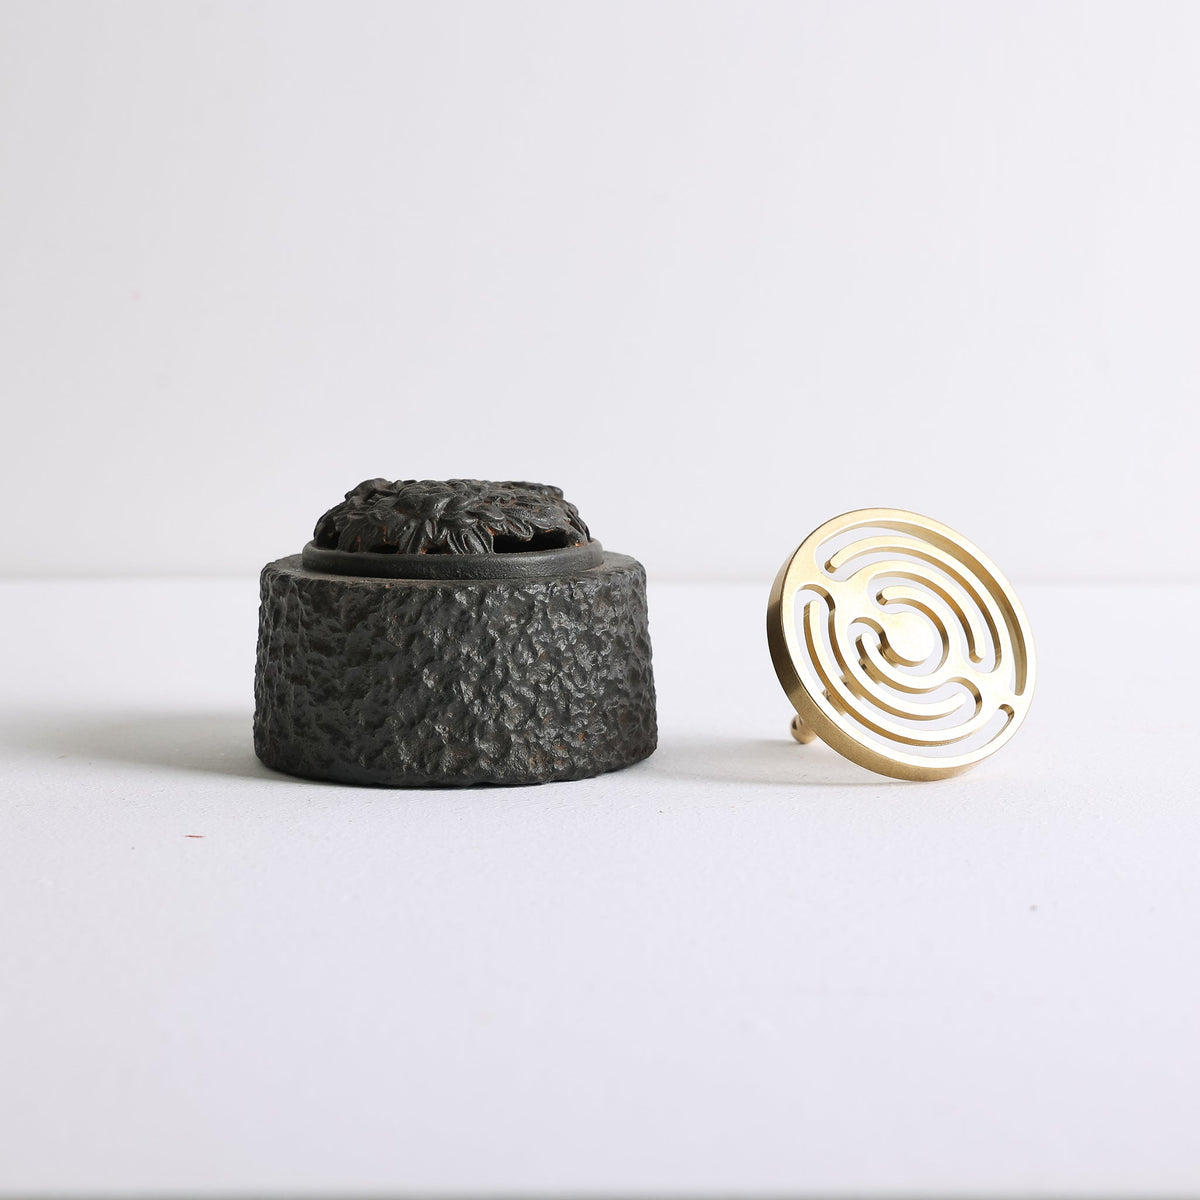 A cast iron incense burner and bronze mold for making incense seals